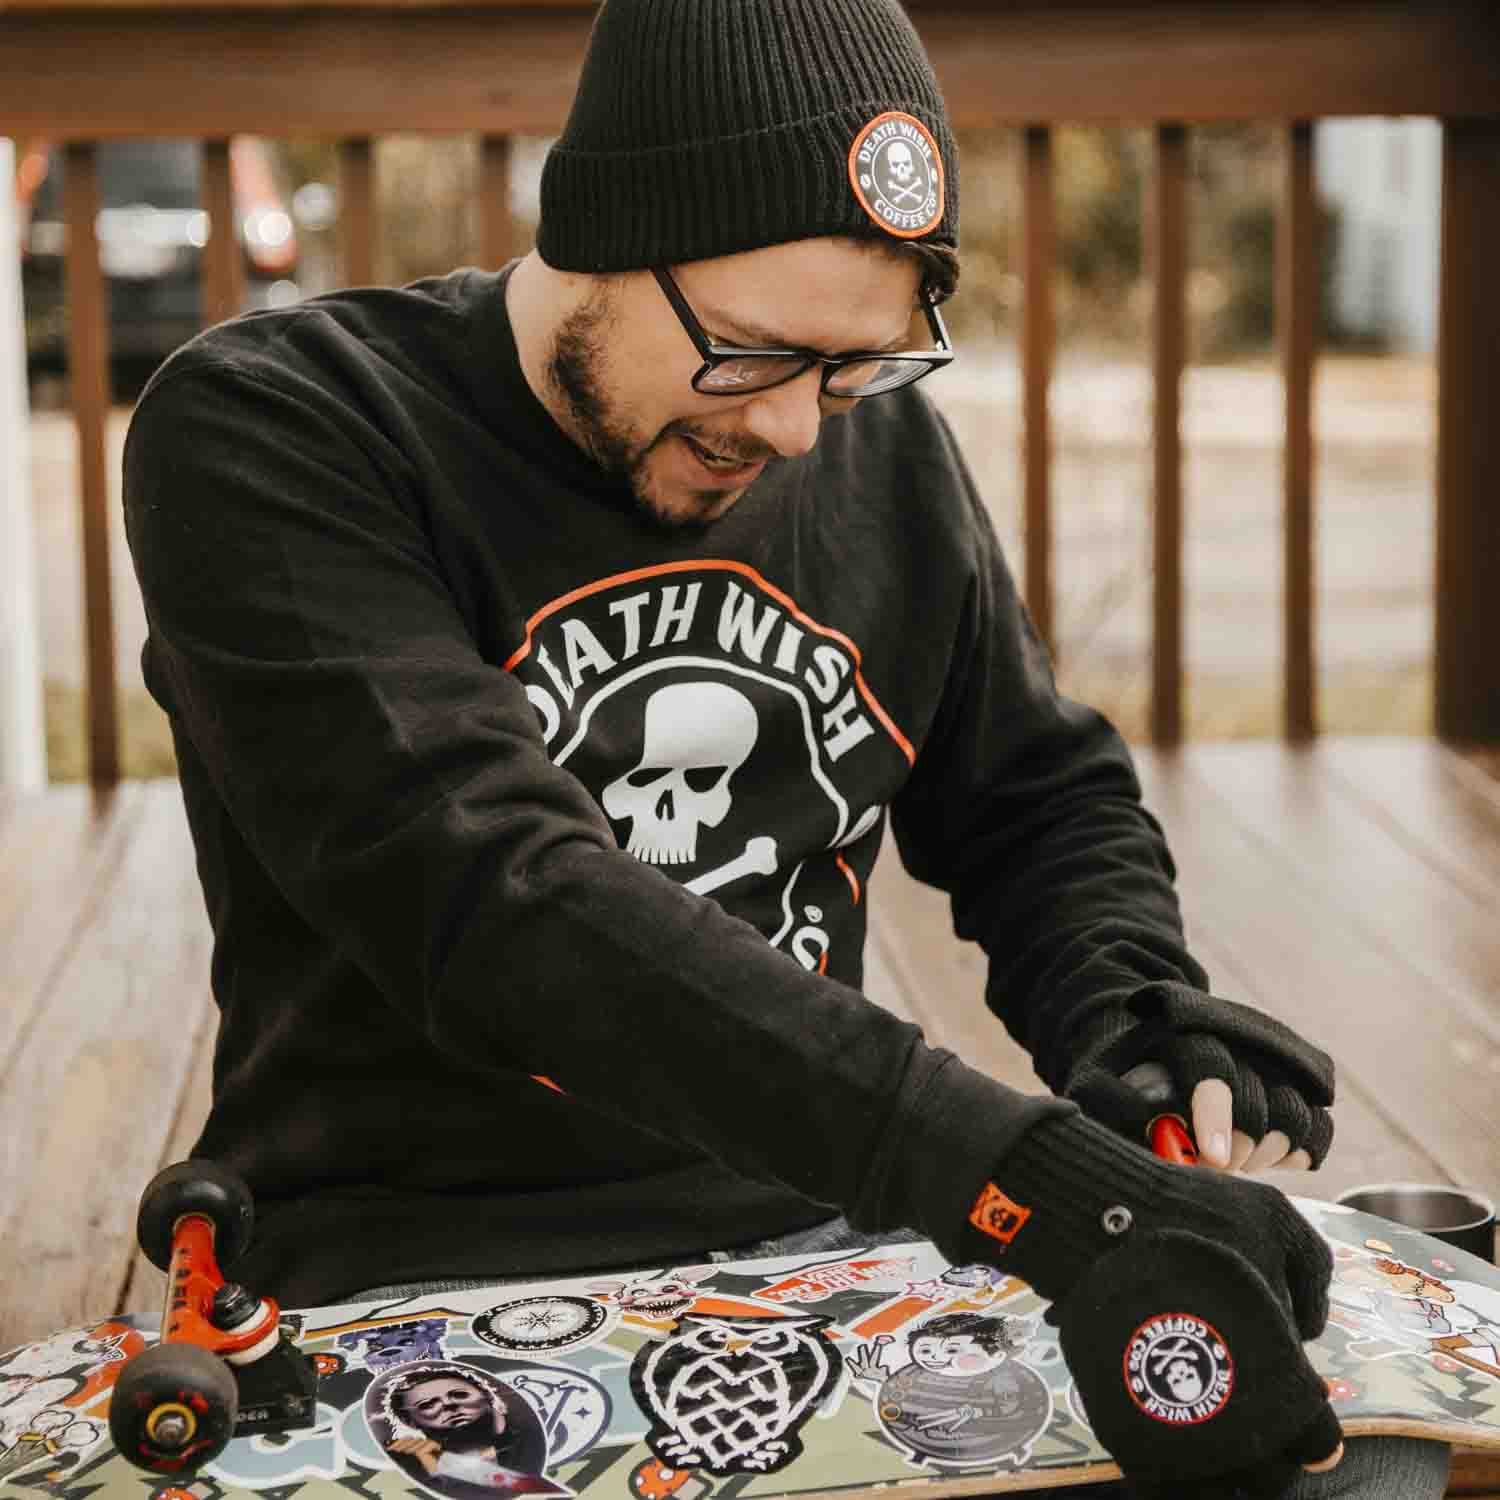 Tuning a skateboard while wearing the Death Wish Coffee Classic Beanie.